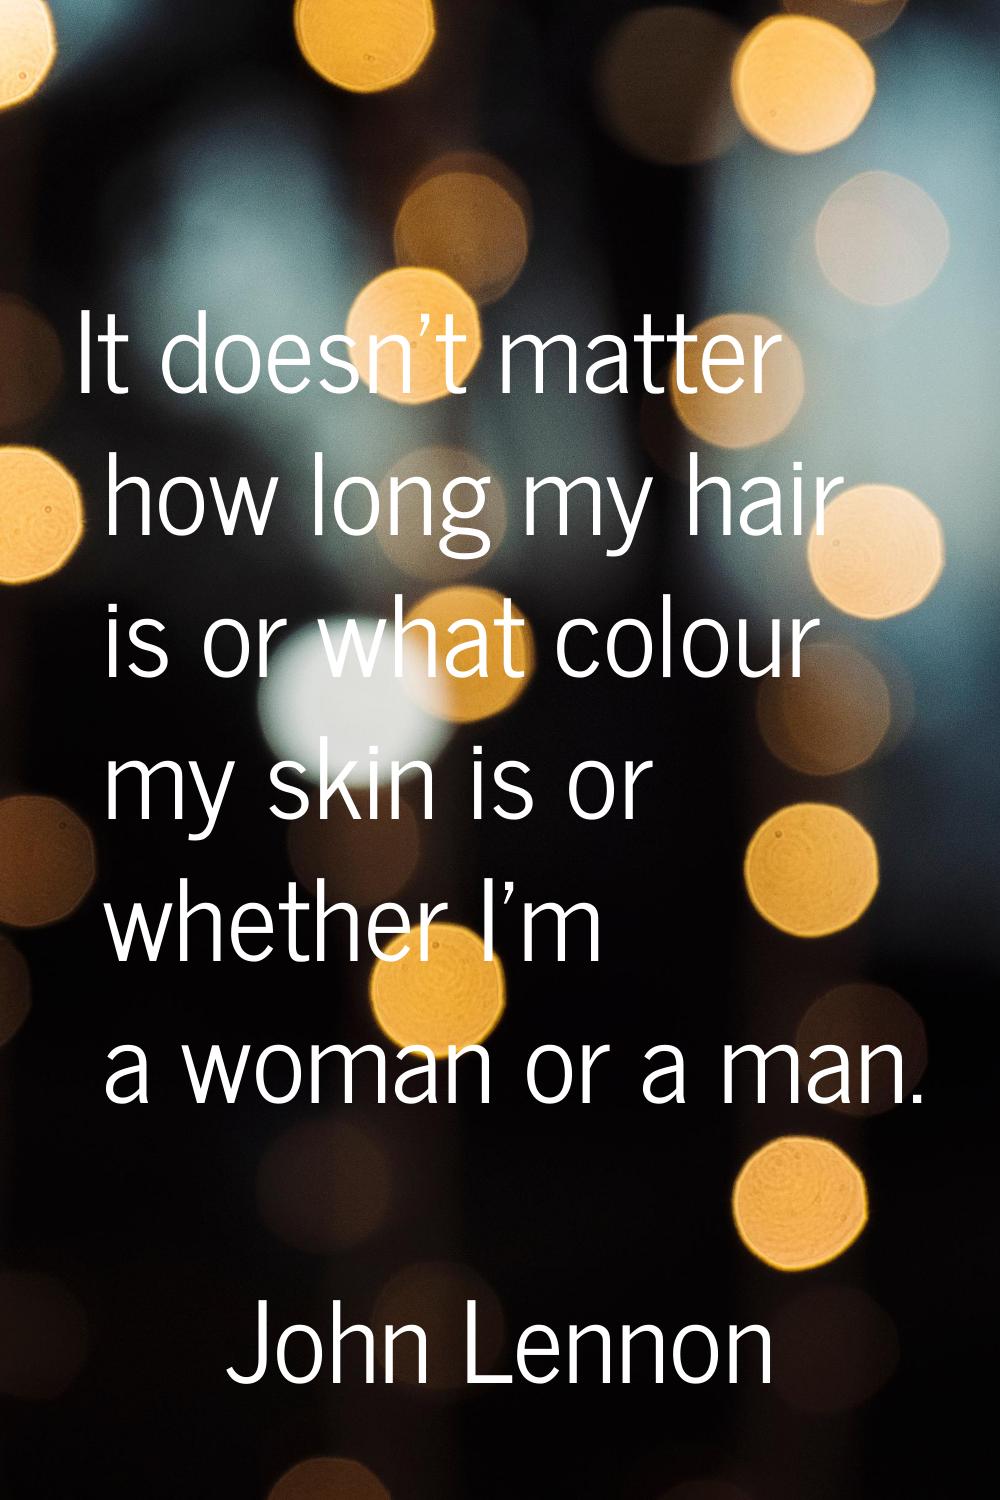 It doesn't matter how long my hair is or what colour my skin is or whether I'm a woman or a man.